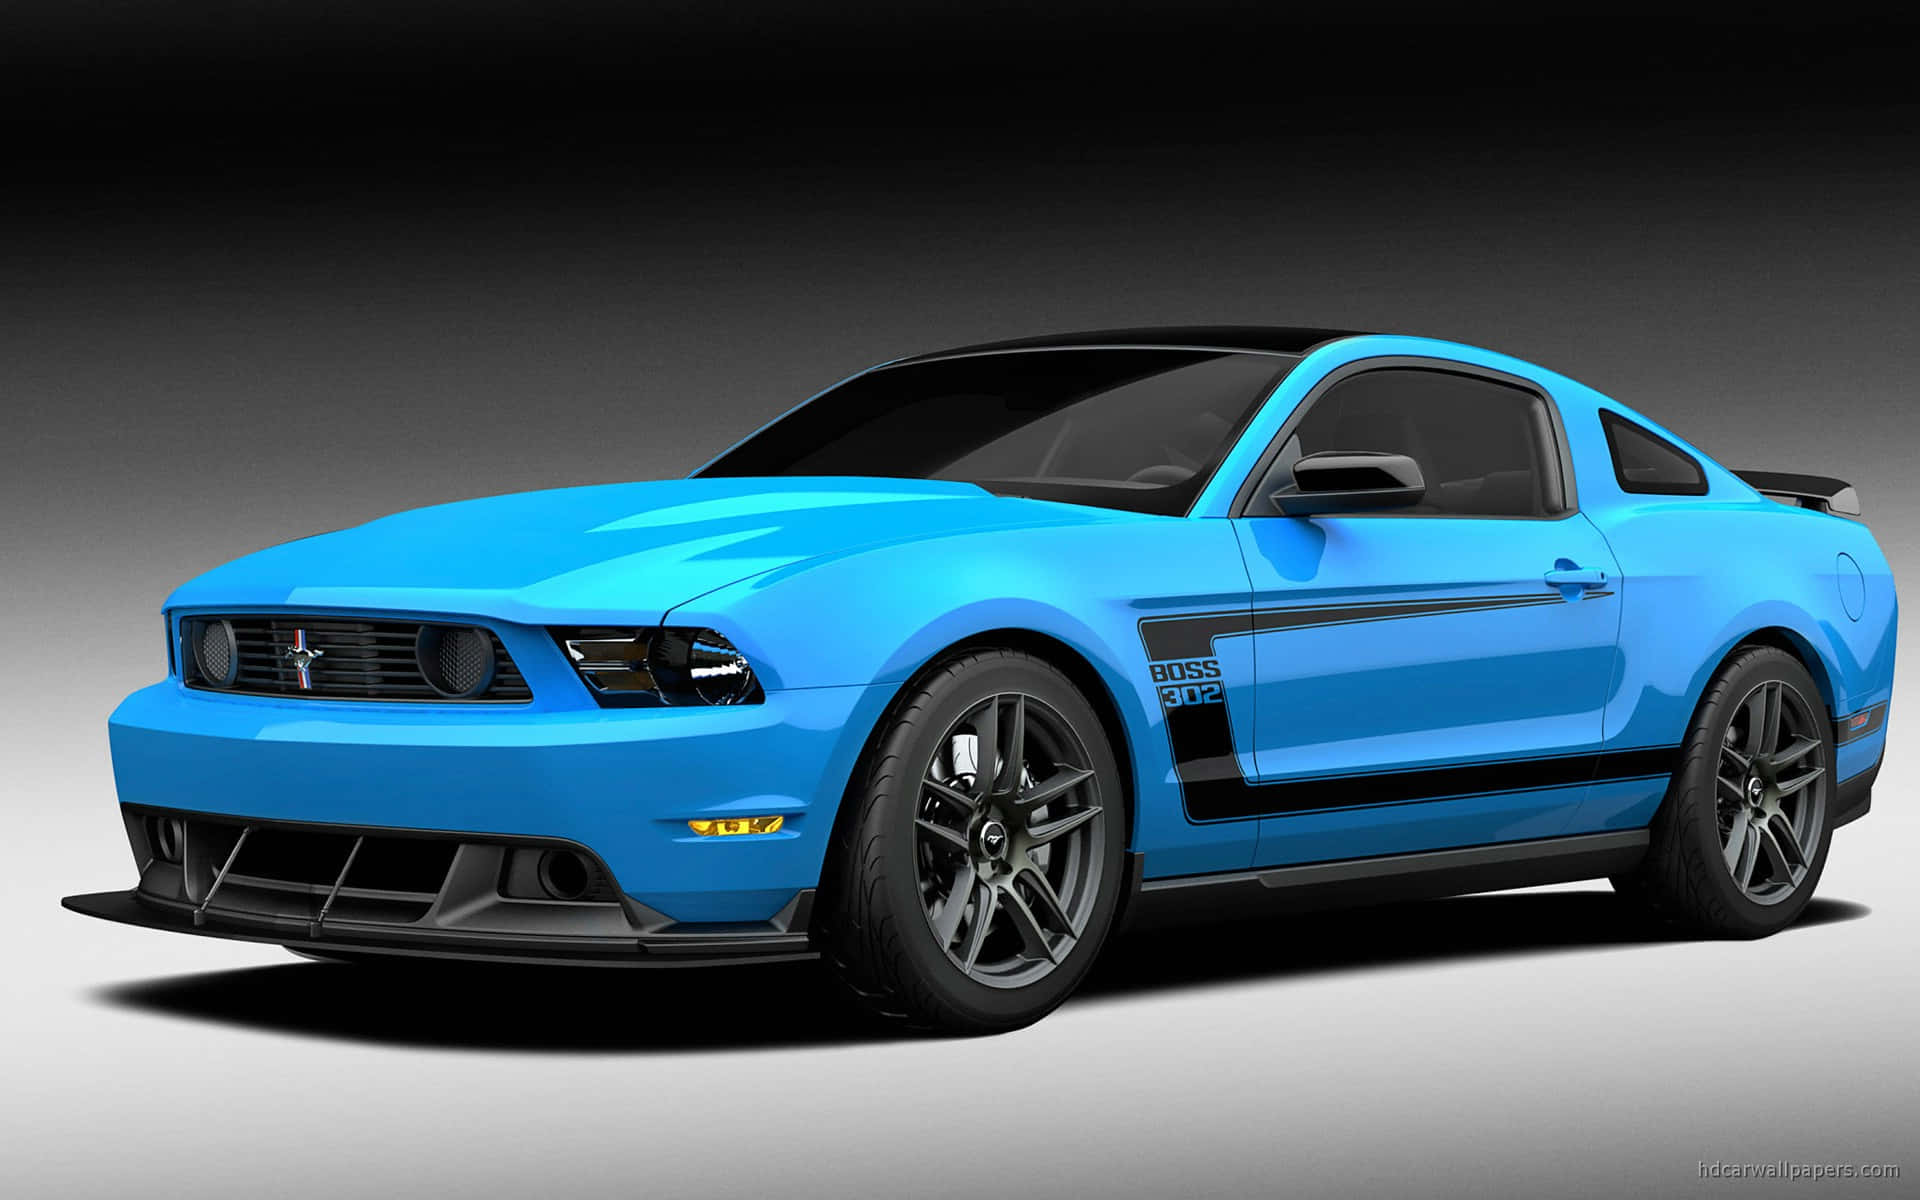 A Blue Mustang Is Shown In An Image Wallpaper